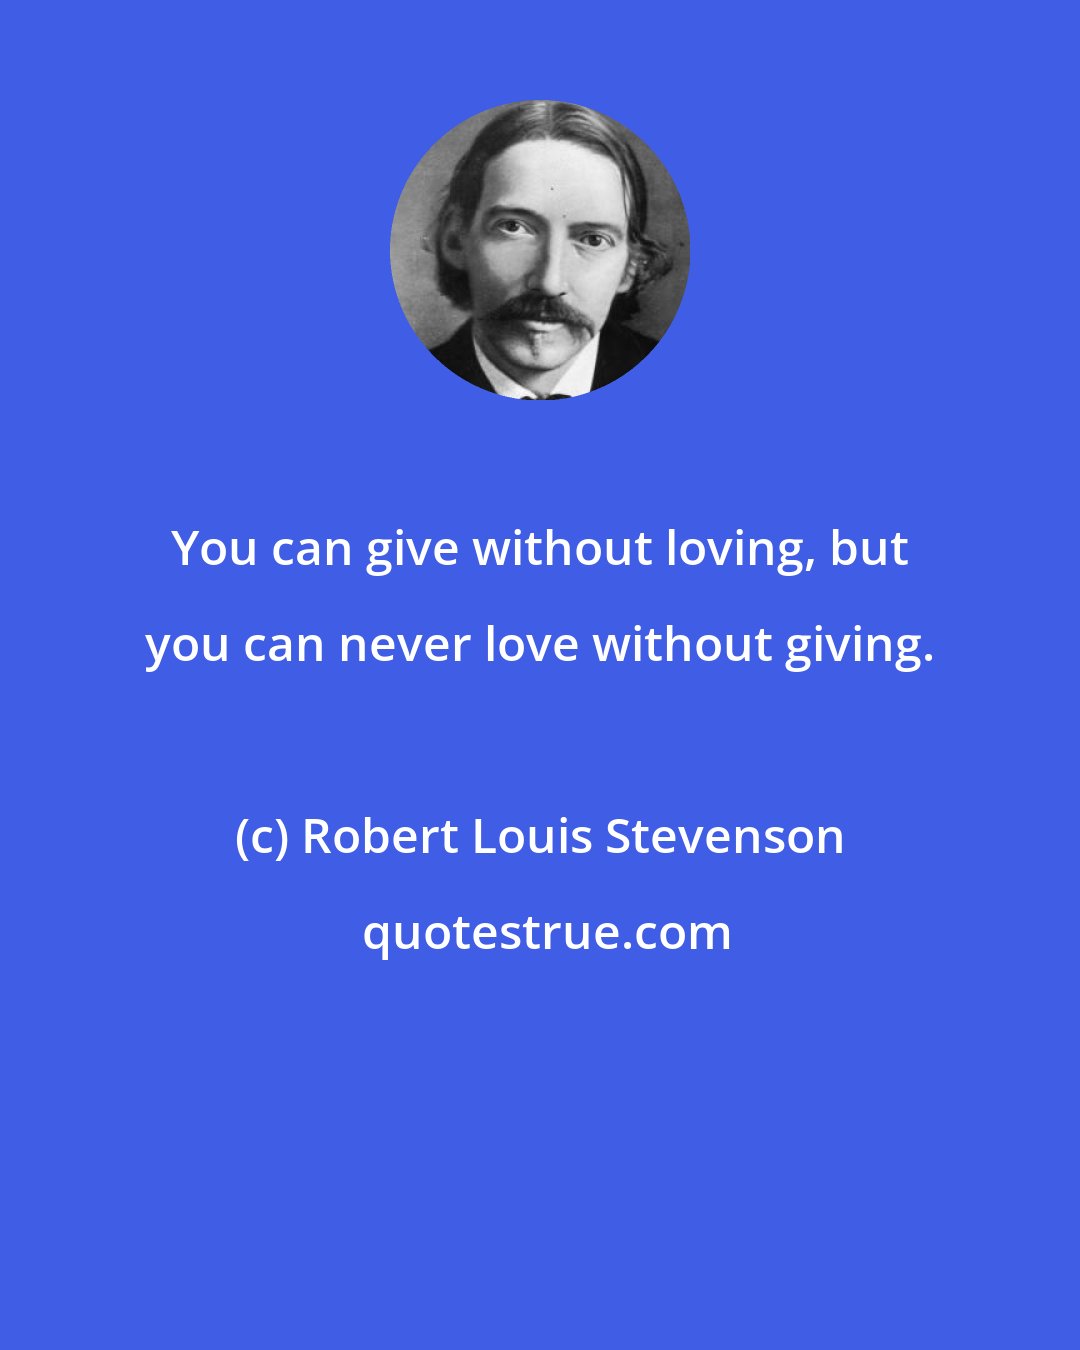 Robert Louis Stevenson: You can give without loving, but you can never love without giving.